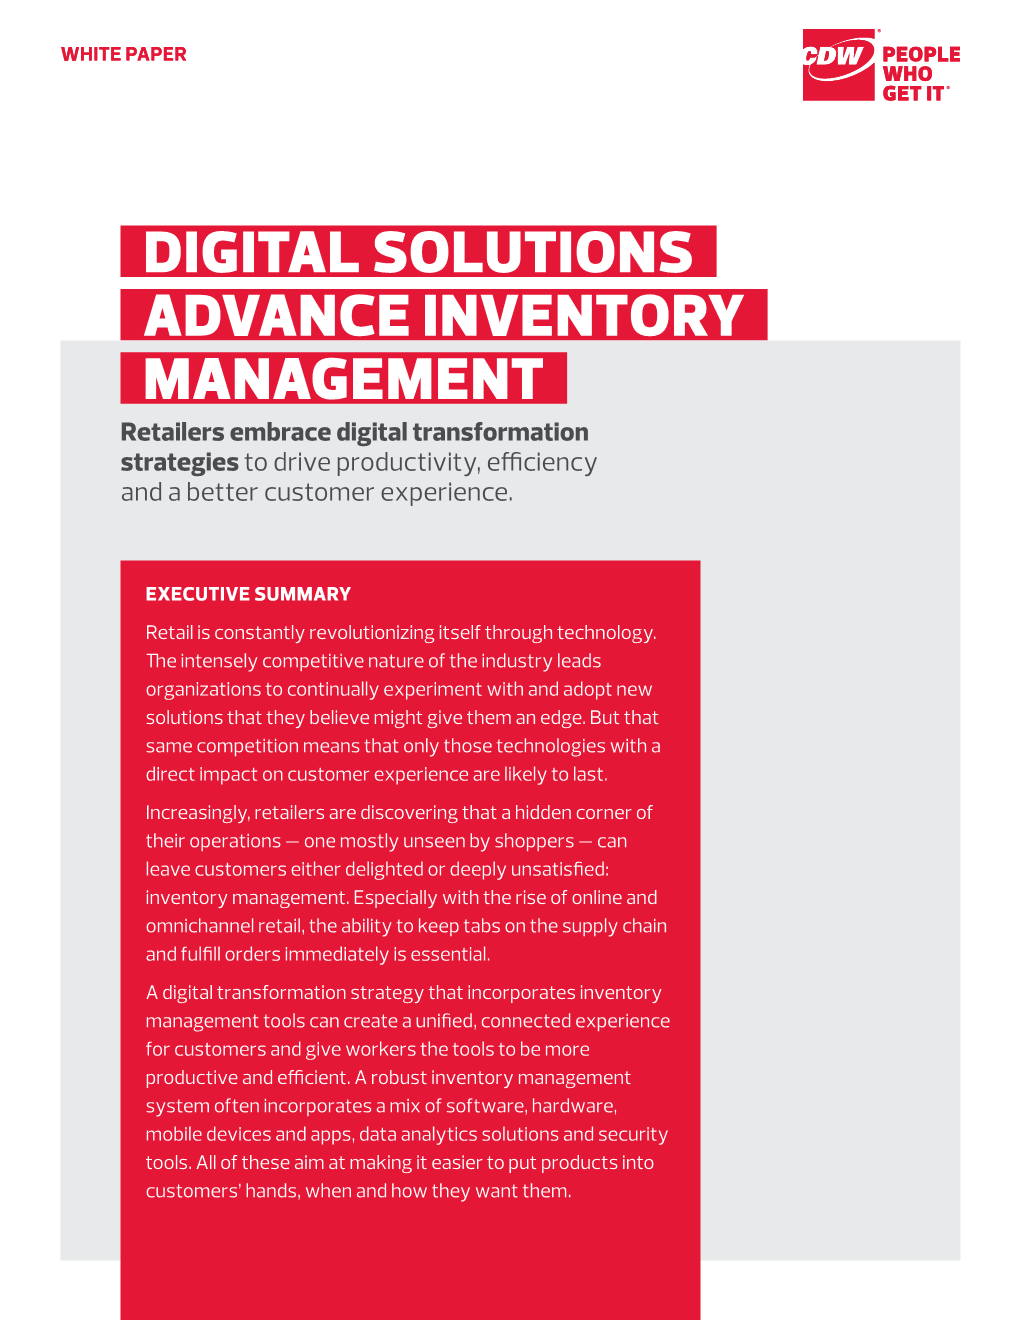 DIGITAL SOLUTIONS ADVANCE INVENTORY MANAGEMENT Retailers Embrace Digital Transformation Strategies to Drive Productivity, Efficiency and a Better Customer Experience